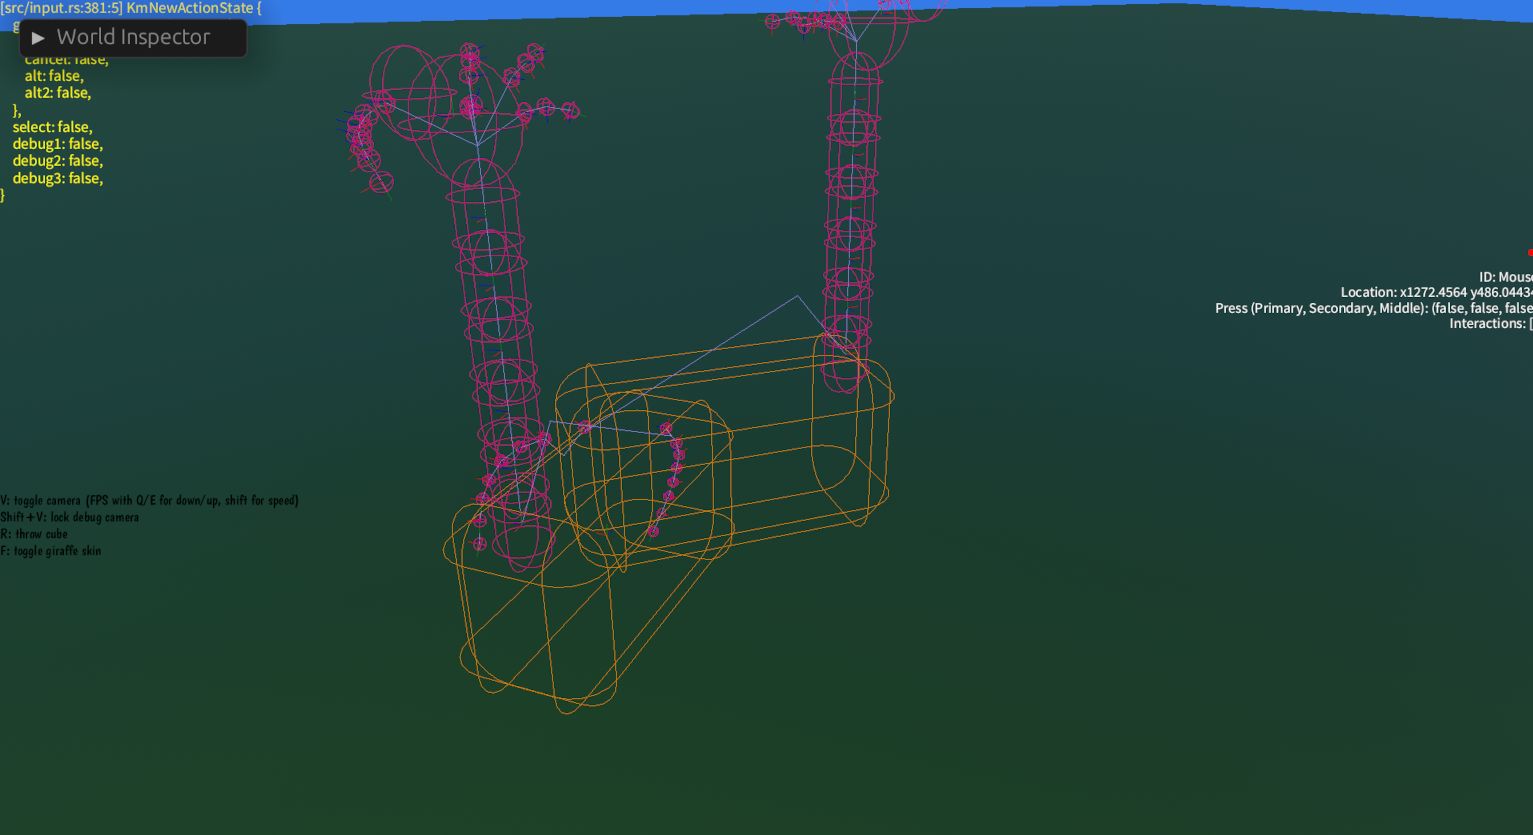 Same image, but without models, it shows the physics shape used for the
  giraffes